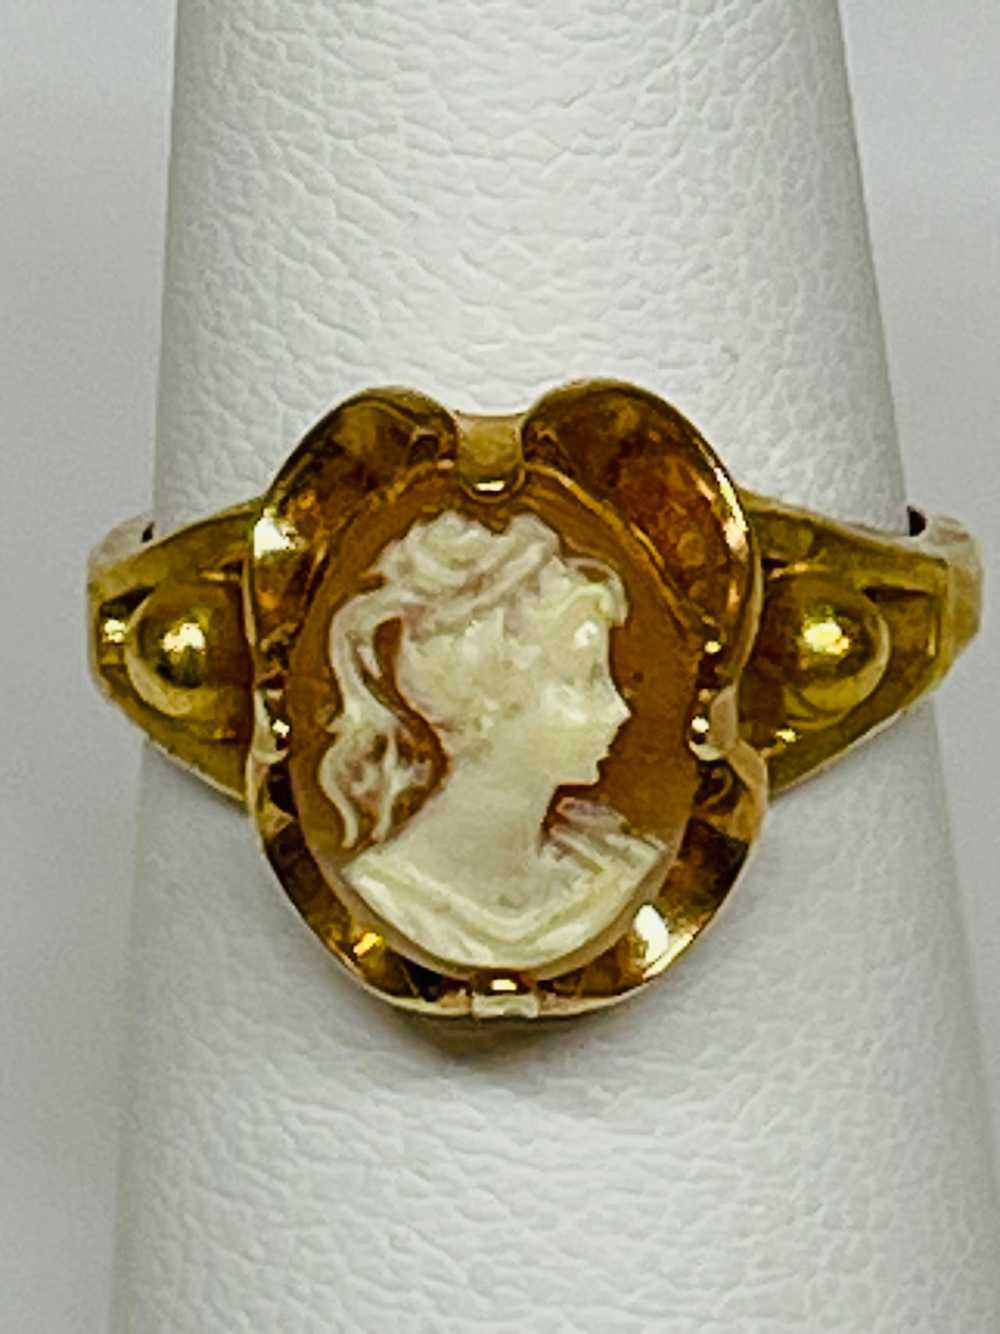 10K Gold Filled Cameo Ring - image 2